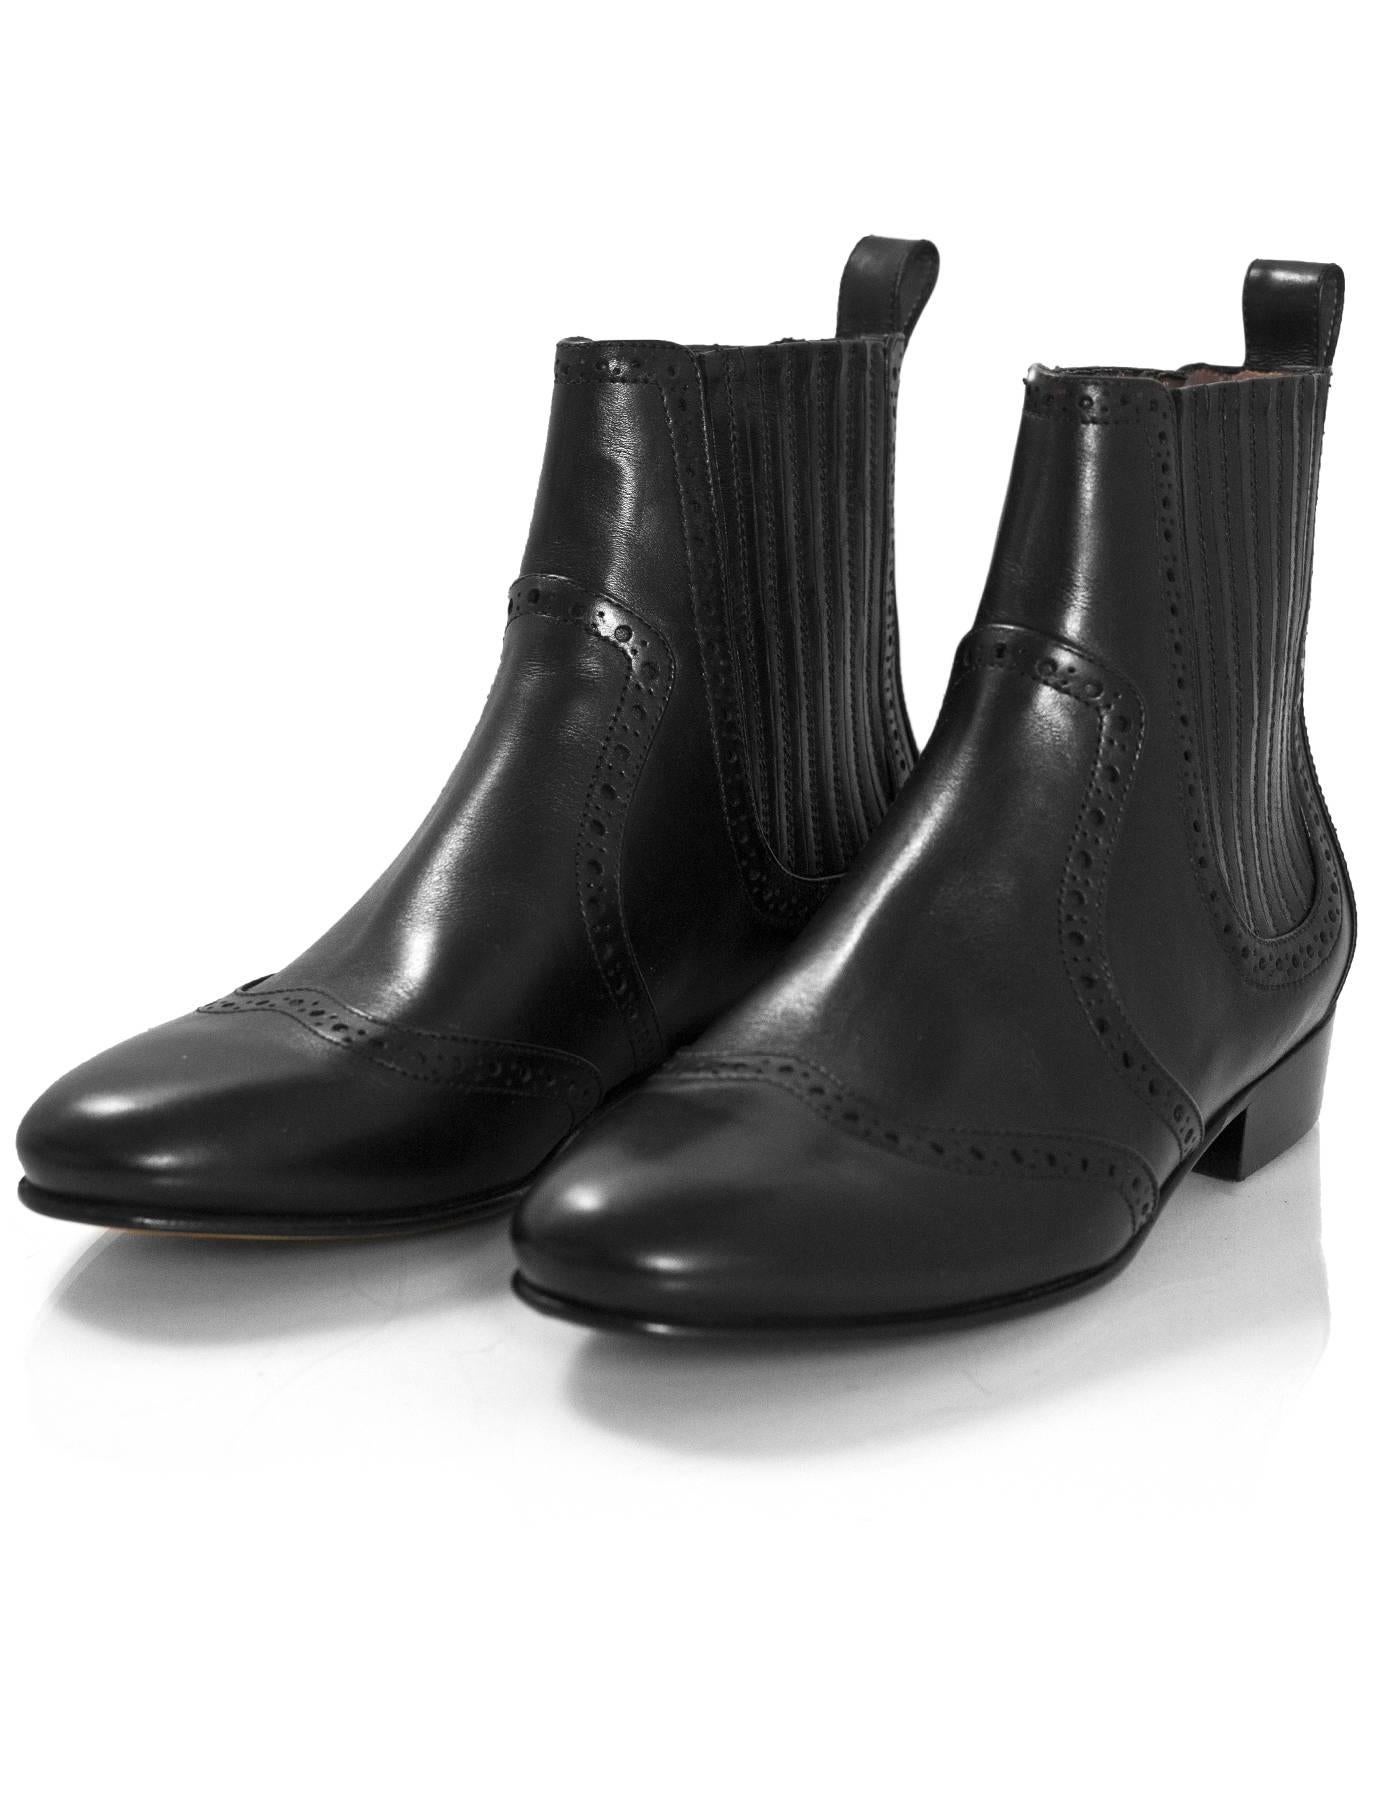 Tabitha Simmons Black Spectator Sibley Ankle Boots Sz 36

Made In: Italy
Color: Black
Materials: Leather
Closure/Opening: Stretch sides
Sole Stamp: Tabitha Simmons made in Italy 36
Retail Price: $795+ tax
Overall Condition: Excellent pre-owned